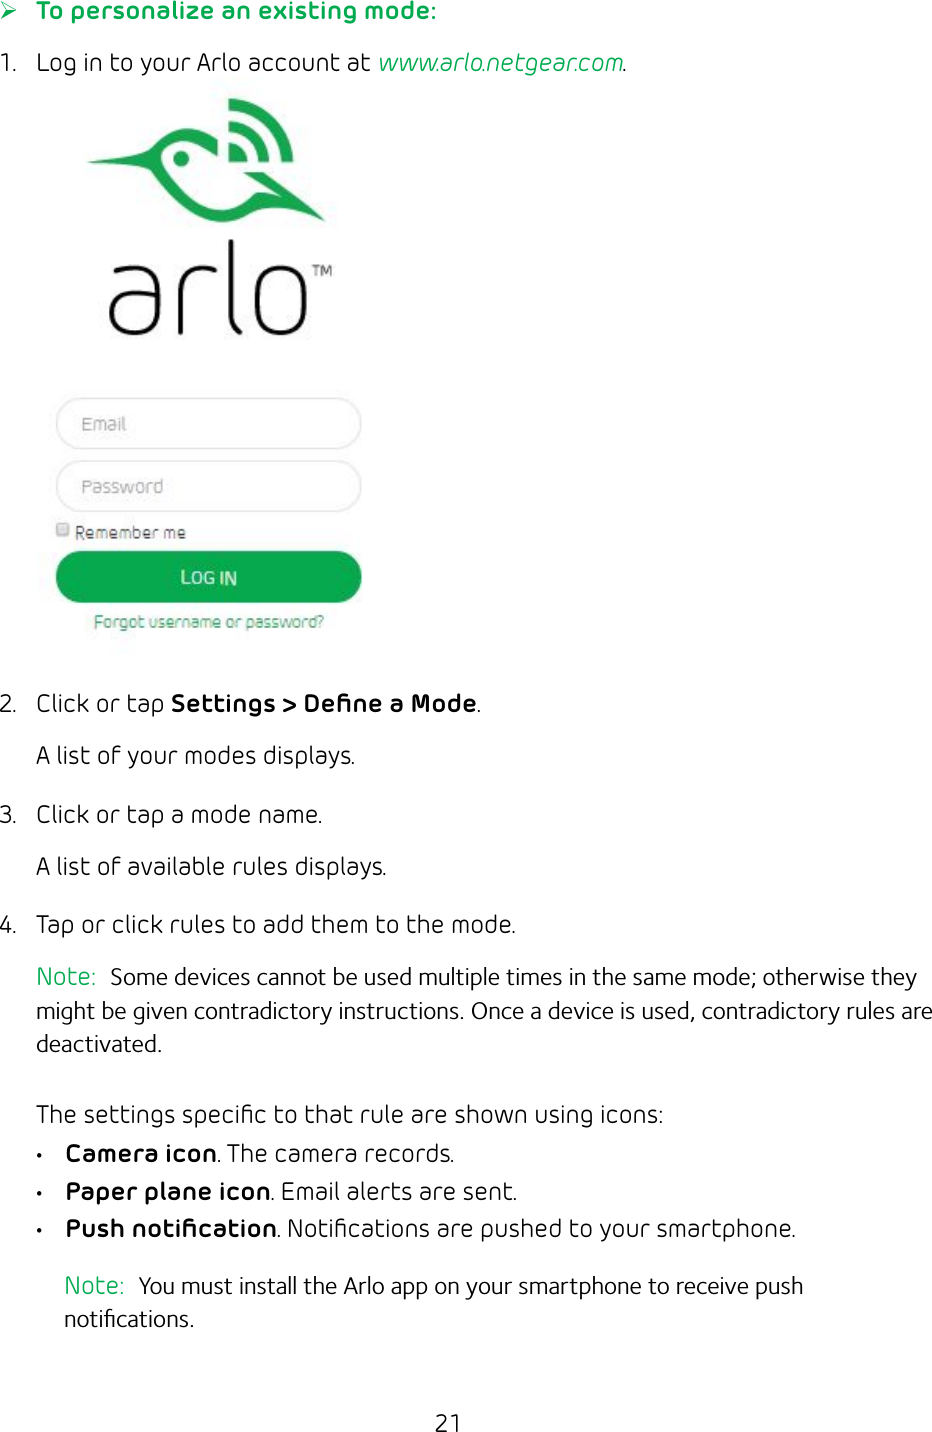 21 ¾To personalize an existing mode:  1.  Log in to your Arlo account at www.arlo.netgear.com.2.  Click or tap Settings &gt; Deﬁne a Mode.A list of your modes displays.  3.  Click or tap a mode name. A list of available rules displays. 4.  Tap or click rules to add them to the mode.Note:  Some devices cannot be used multiple times in the same mode; otherwise they might be given contradictory instructions. Once a device is used, contradictory rules are deactivated.The settings speciﬁc to that rule are shown using icons:• Camera icon. The camera records.• Paper plane icon. Email alerts are sent. • Push notiﬁcation. Notiﬁcations are pushed to your smartphone.  Note:  You must install the Arlo app on your smartphone to receive push notiﬁcations.